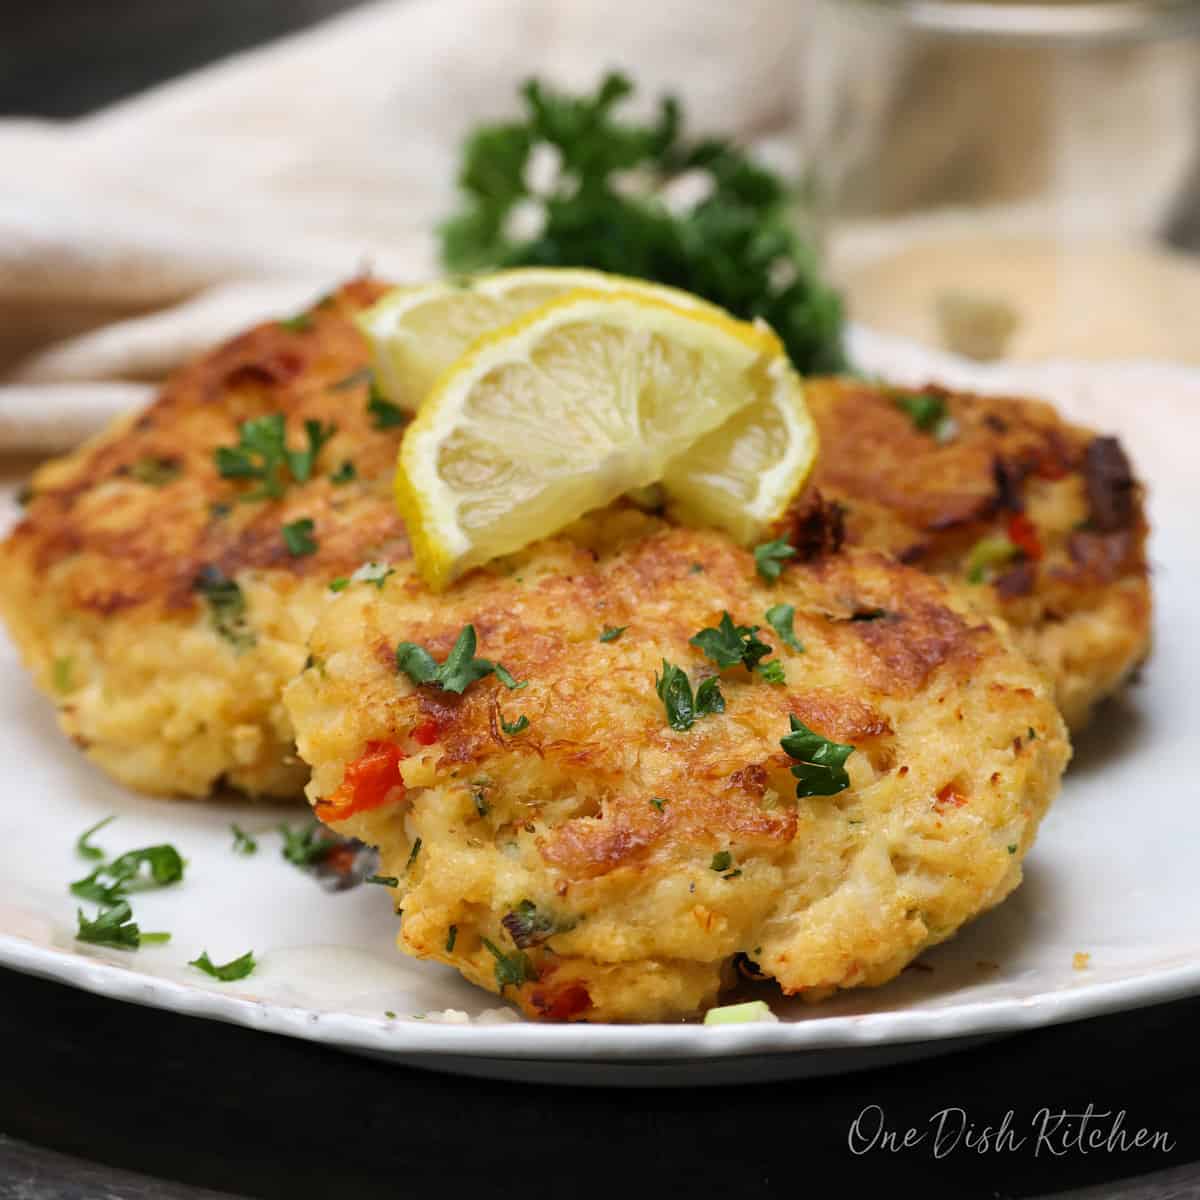 crab cakes topped with lemon juice on a plate.